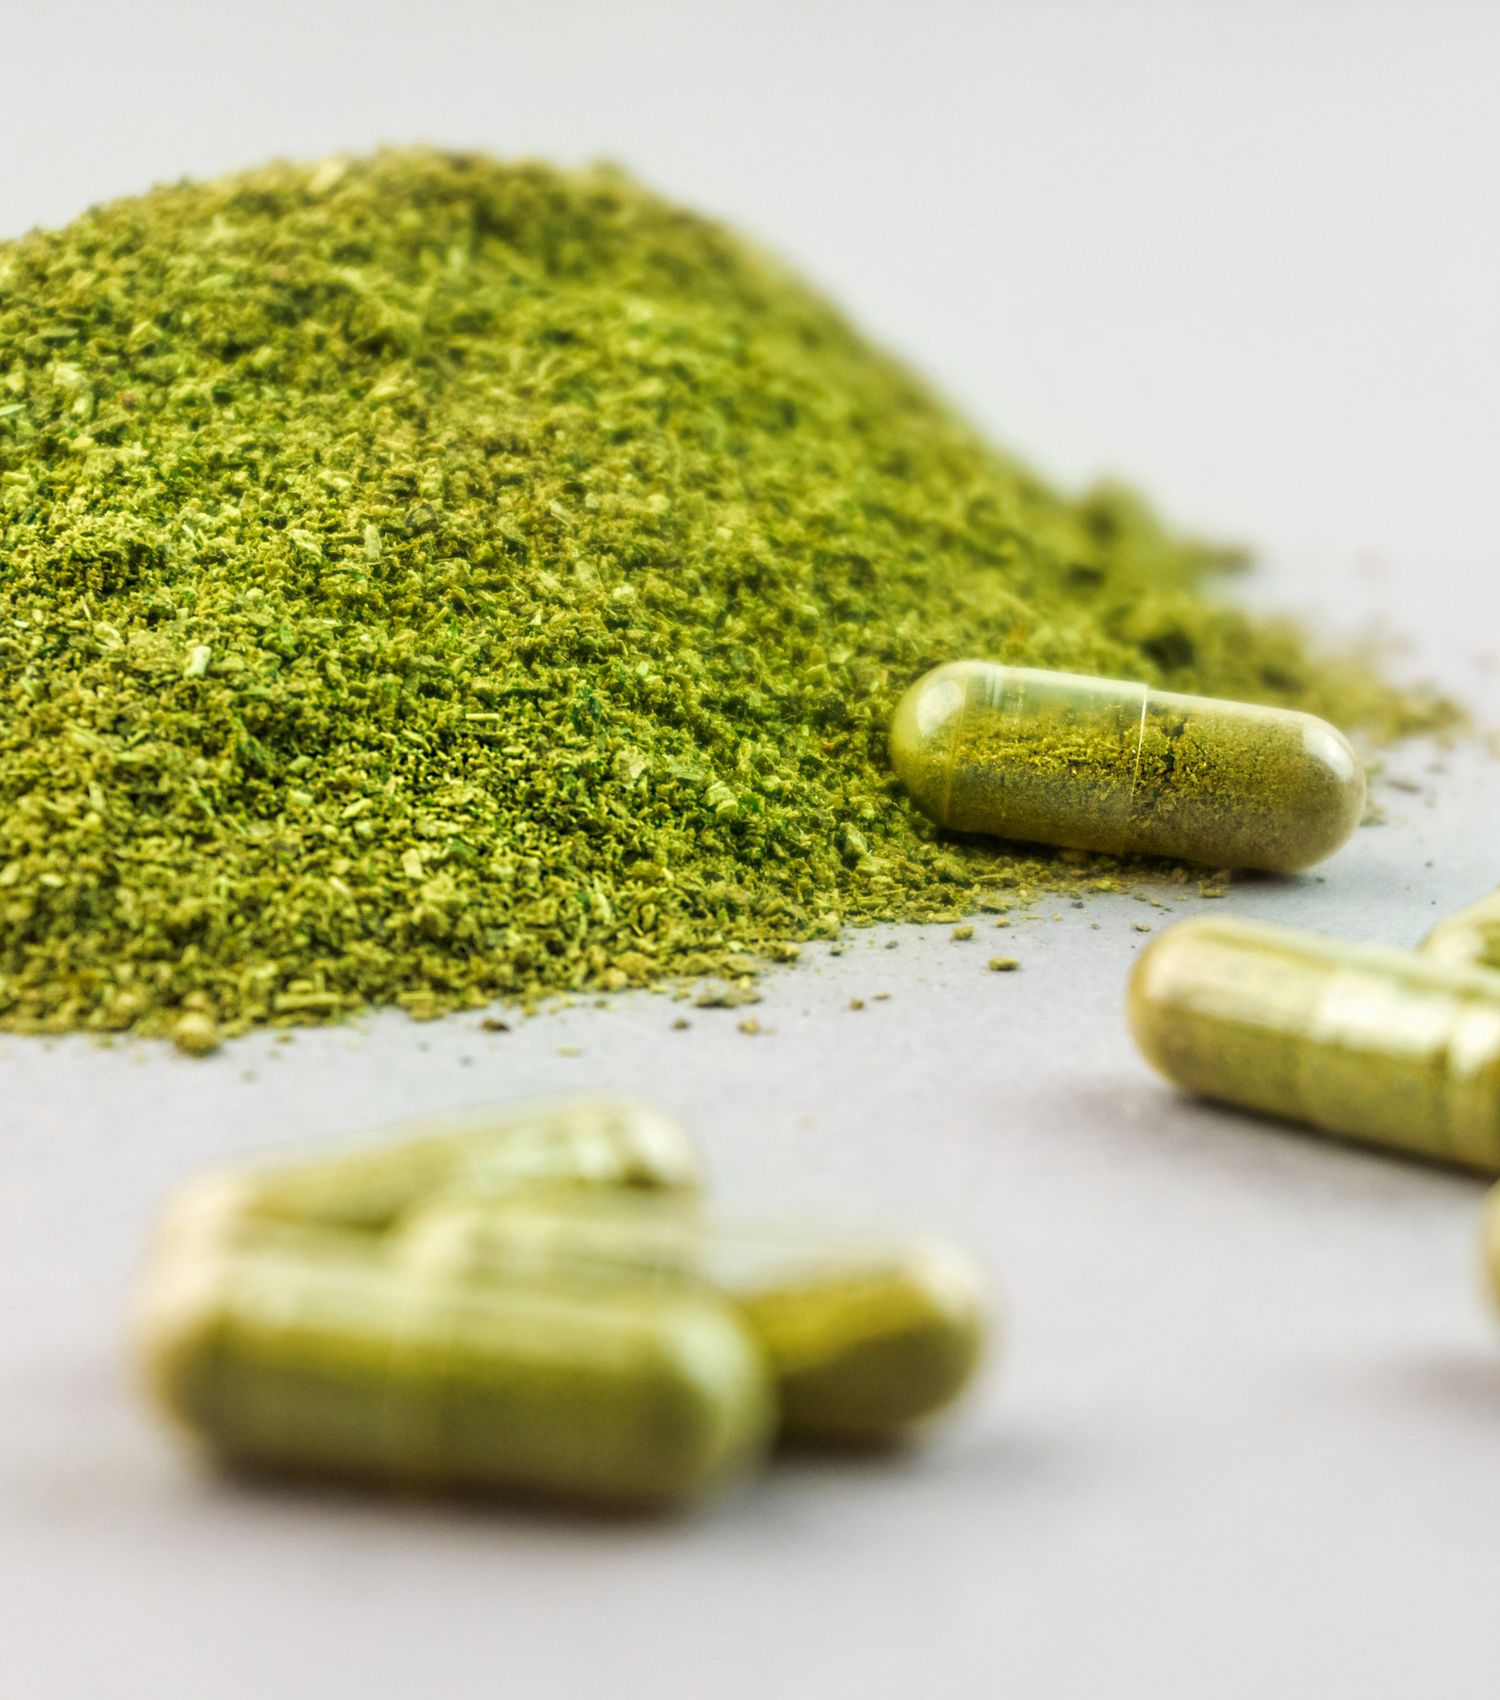 Kratom products tested for heavy metals, biology and quality. We take quality and safety of our kratom seriously and take the precautions necessary. We perform testing on all our kratom powder products and kratom capsules